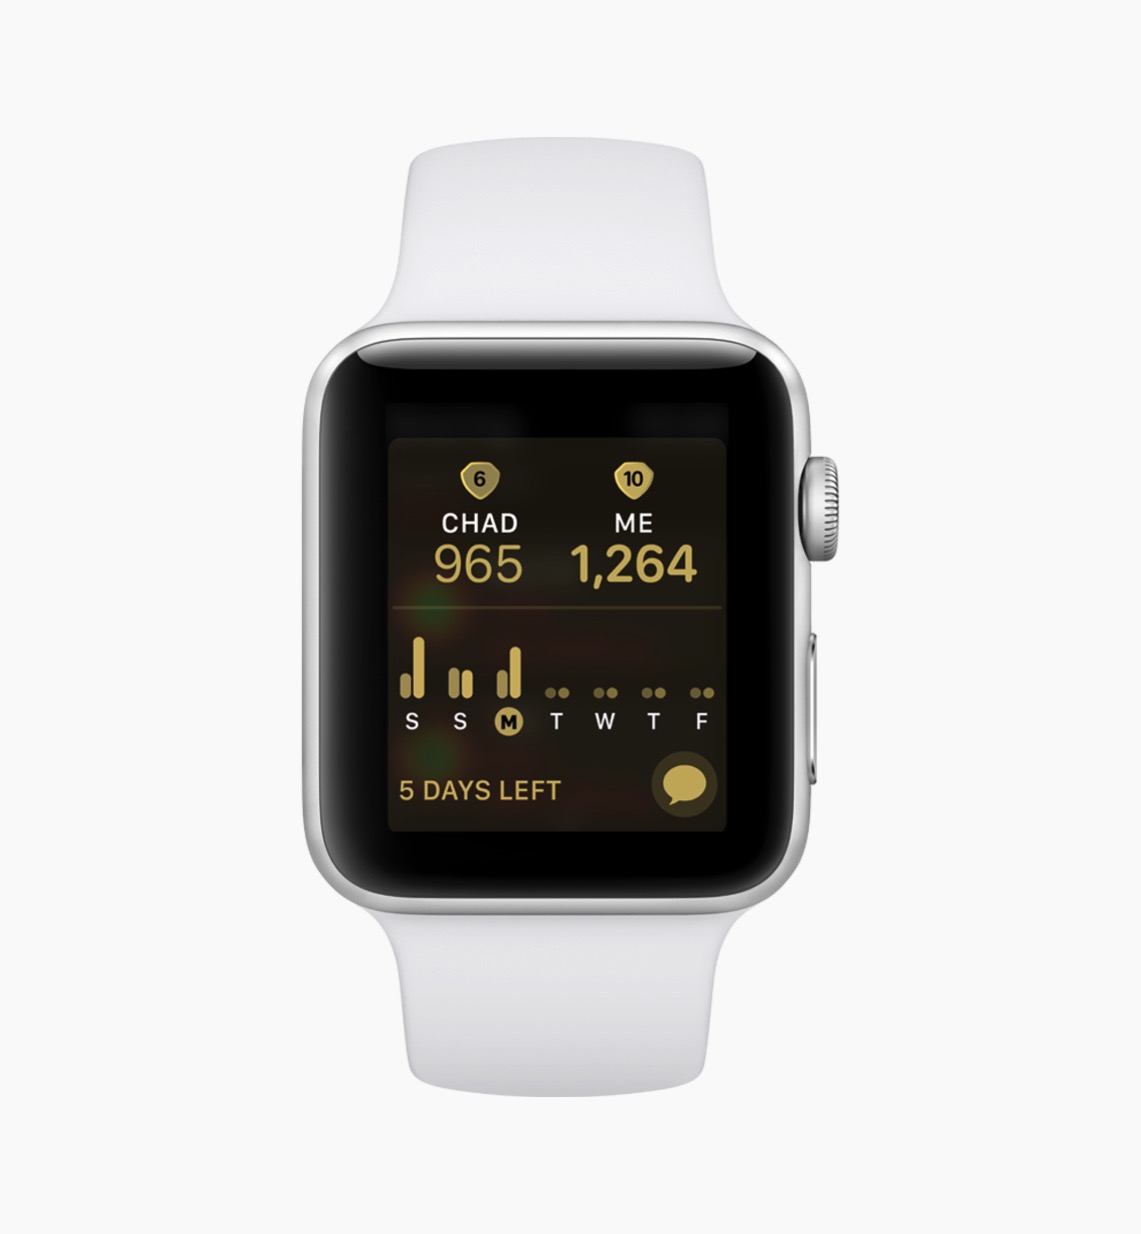 Apple-watchOS_5-Competitions-02-screen-06042018.jpg